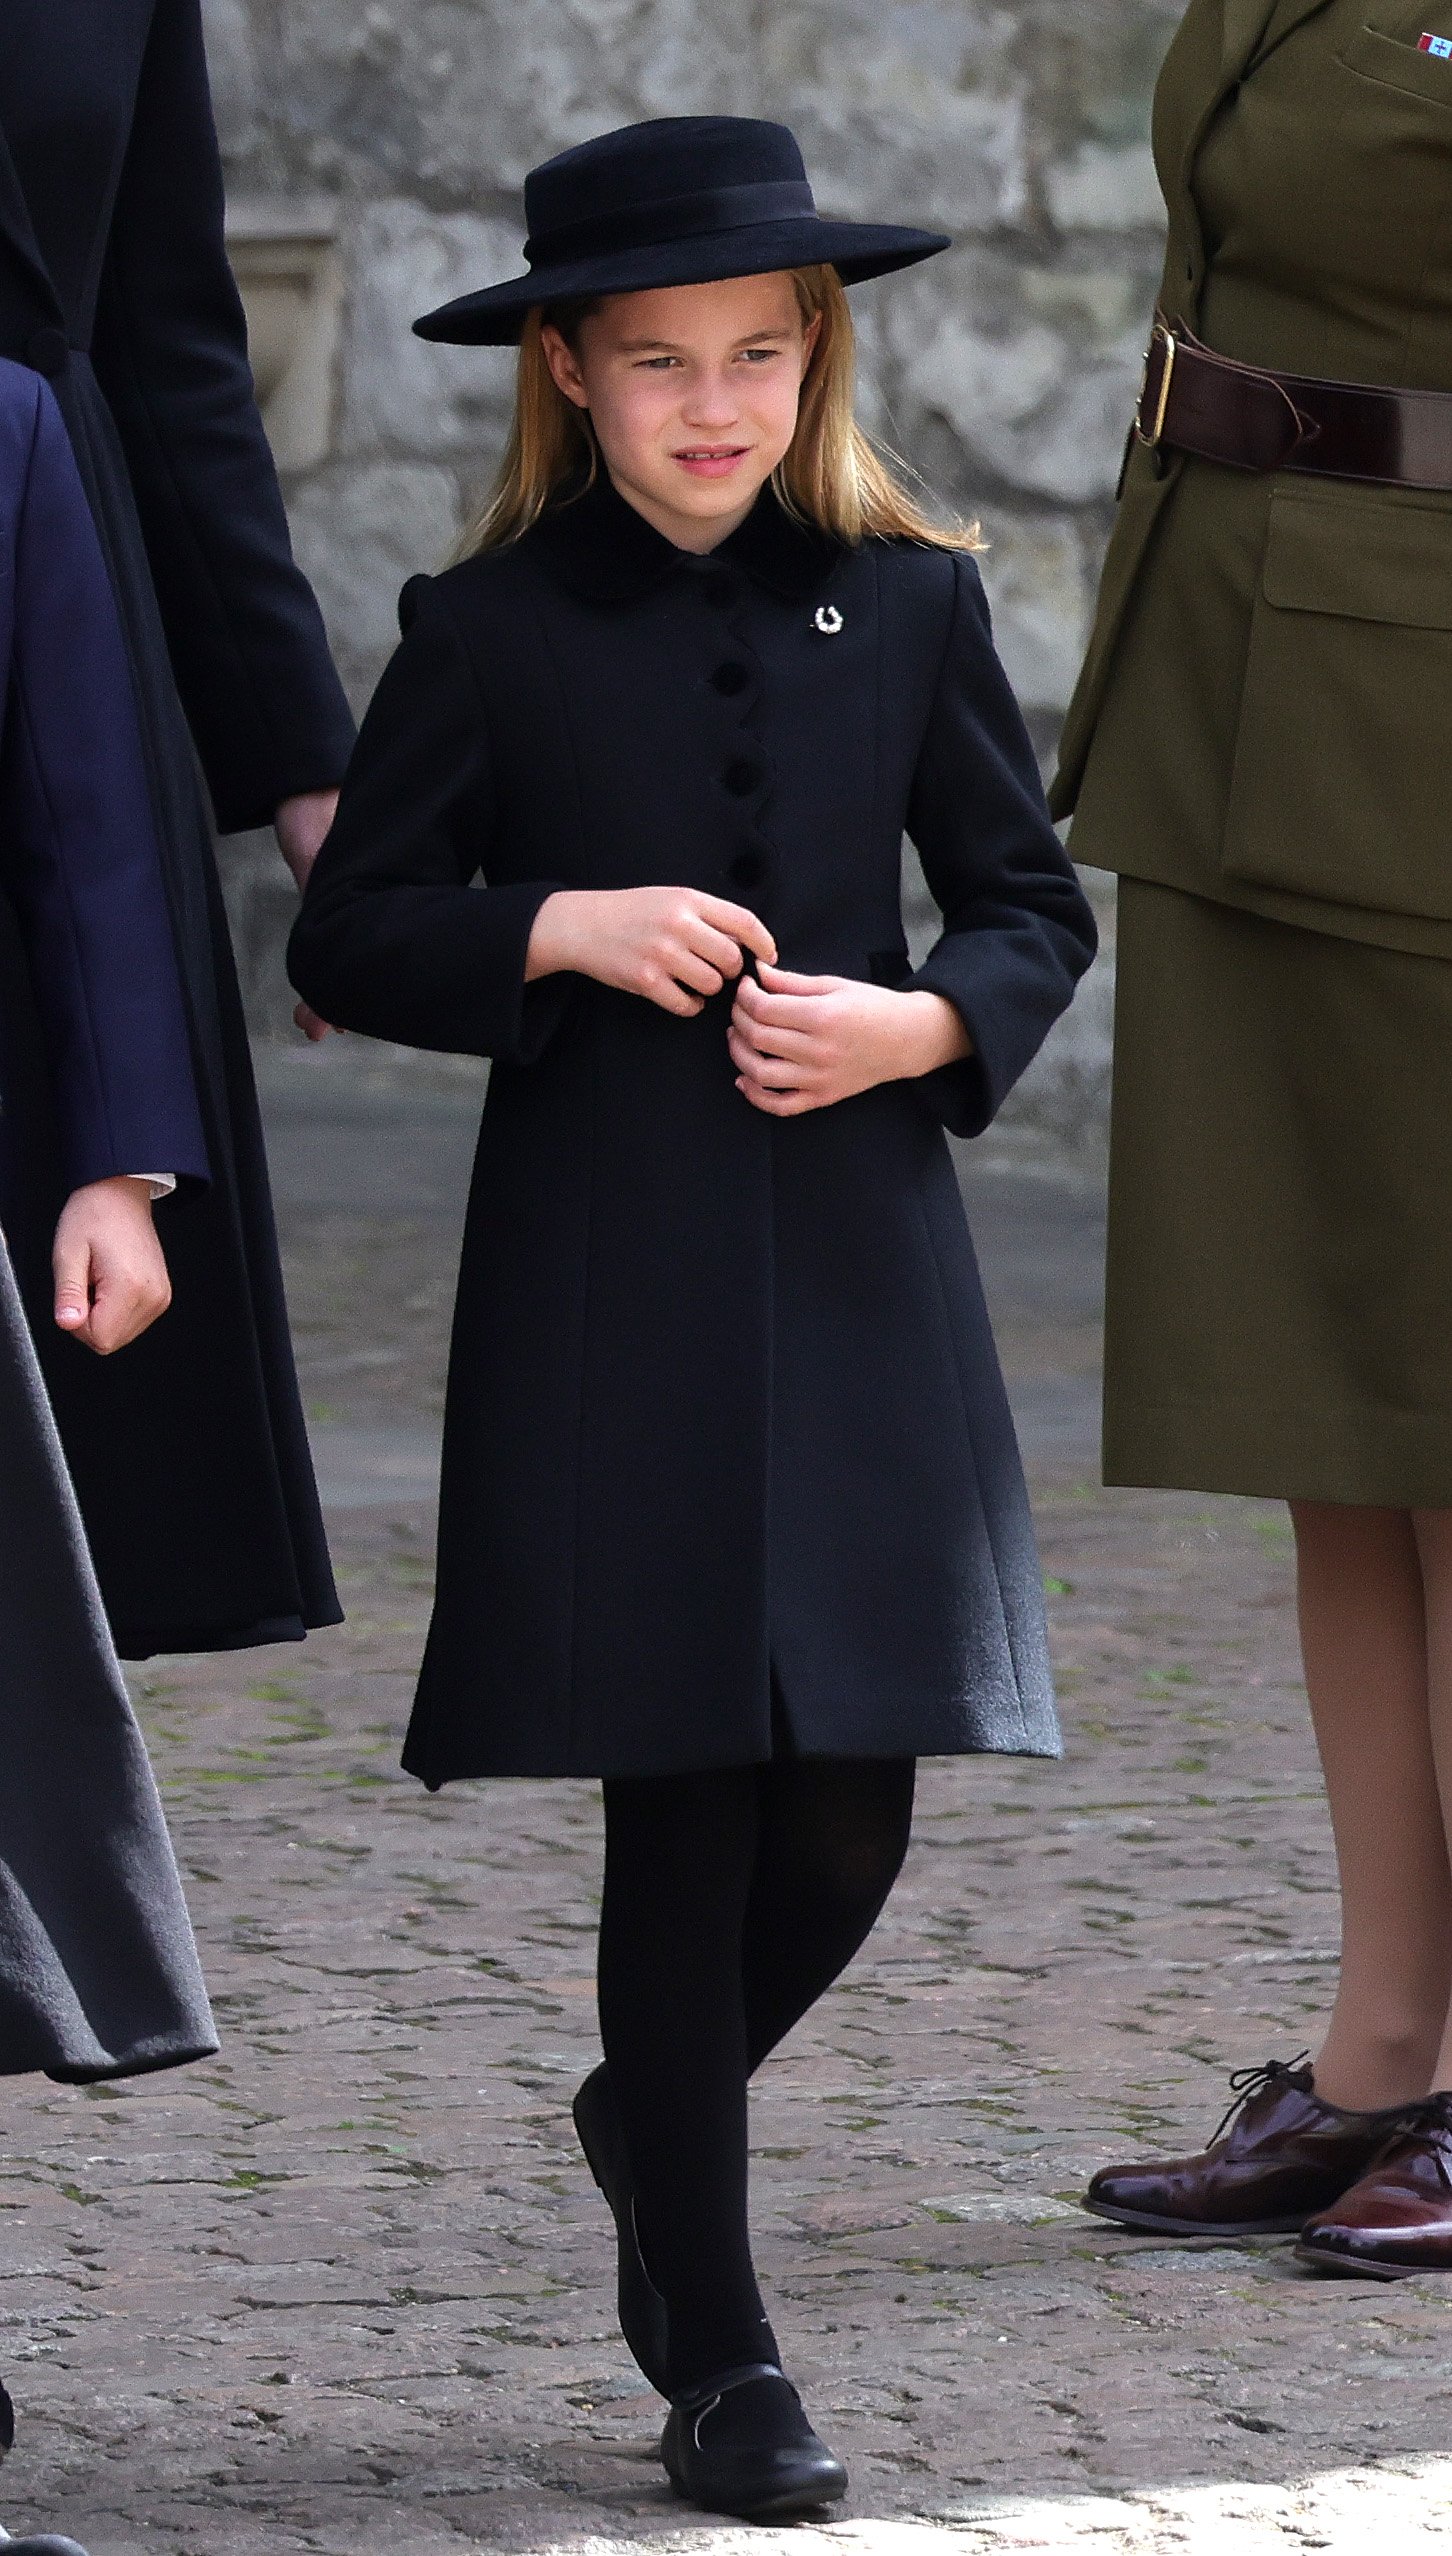 Princess Charlotte of Wales is seen during The State Funeral Of Queen Elizabeth II at Westminster Abbey on September 19, 2022 in London, England. | Source: Getty Images